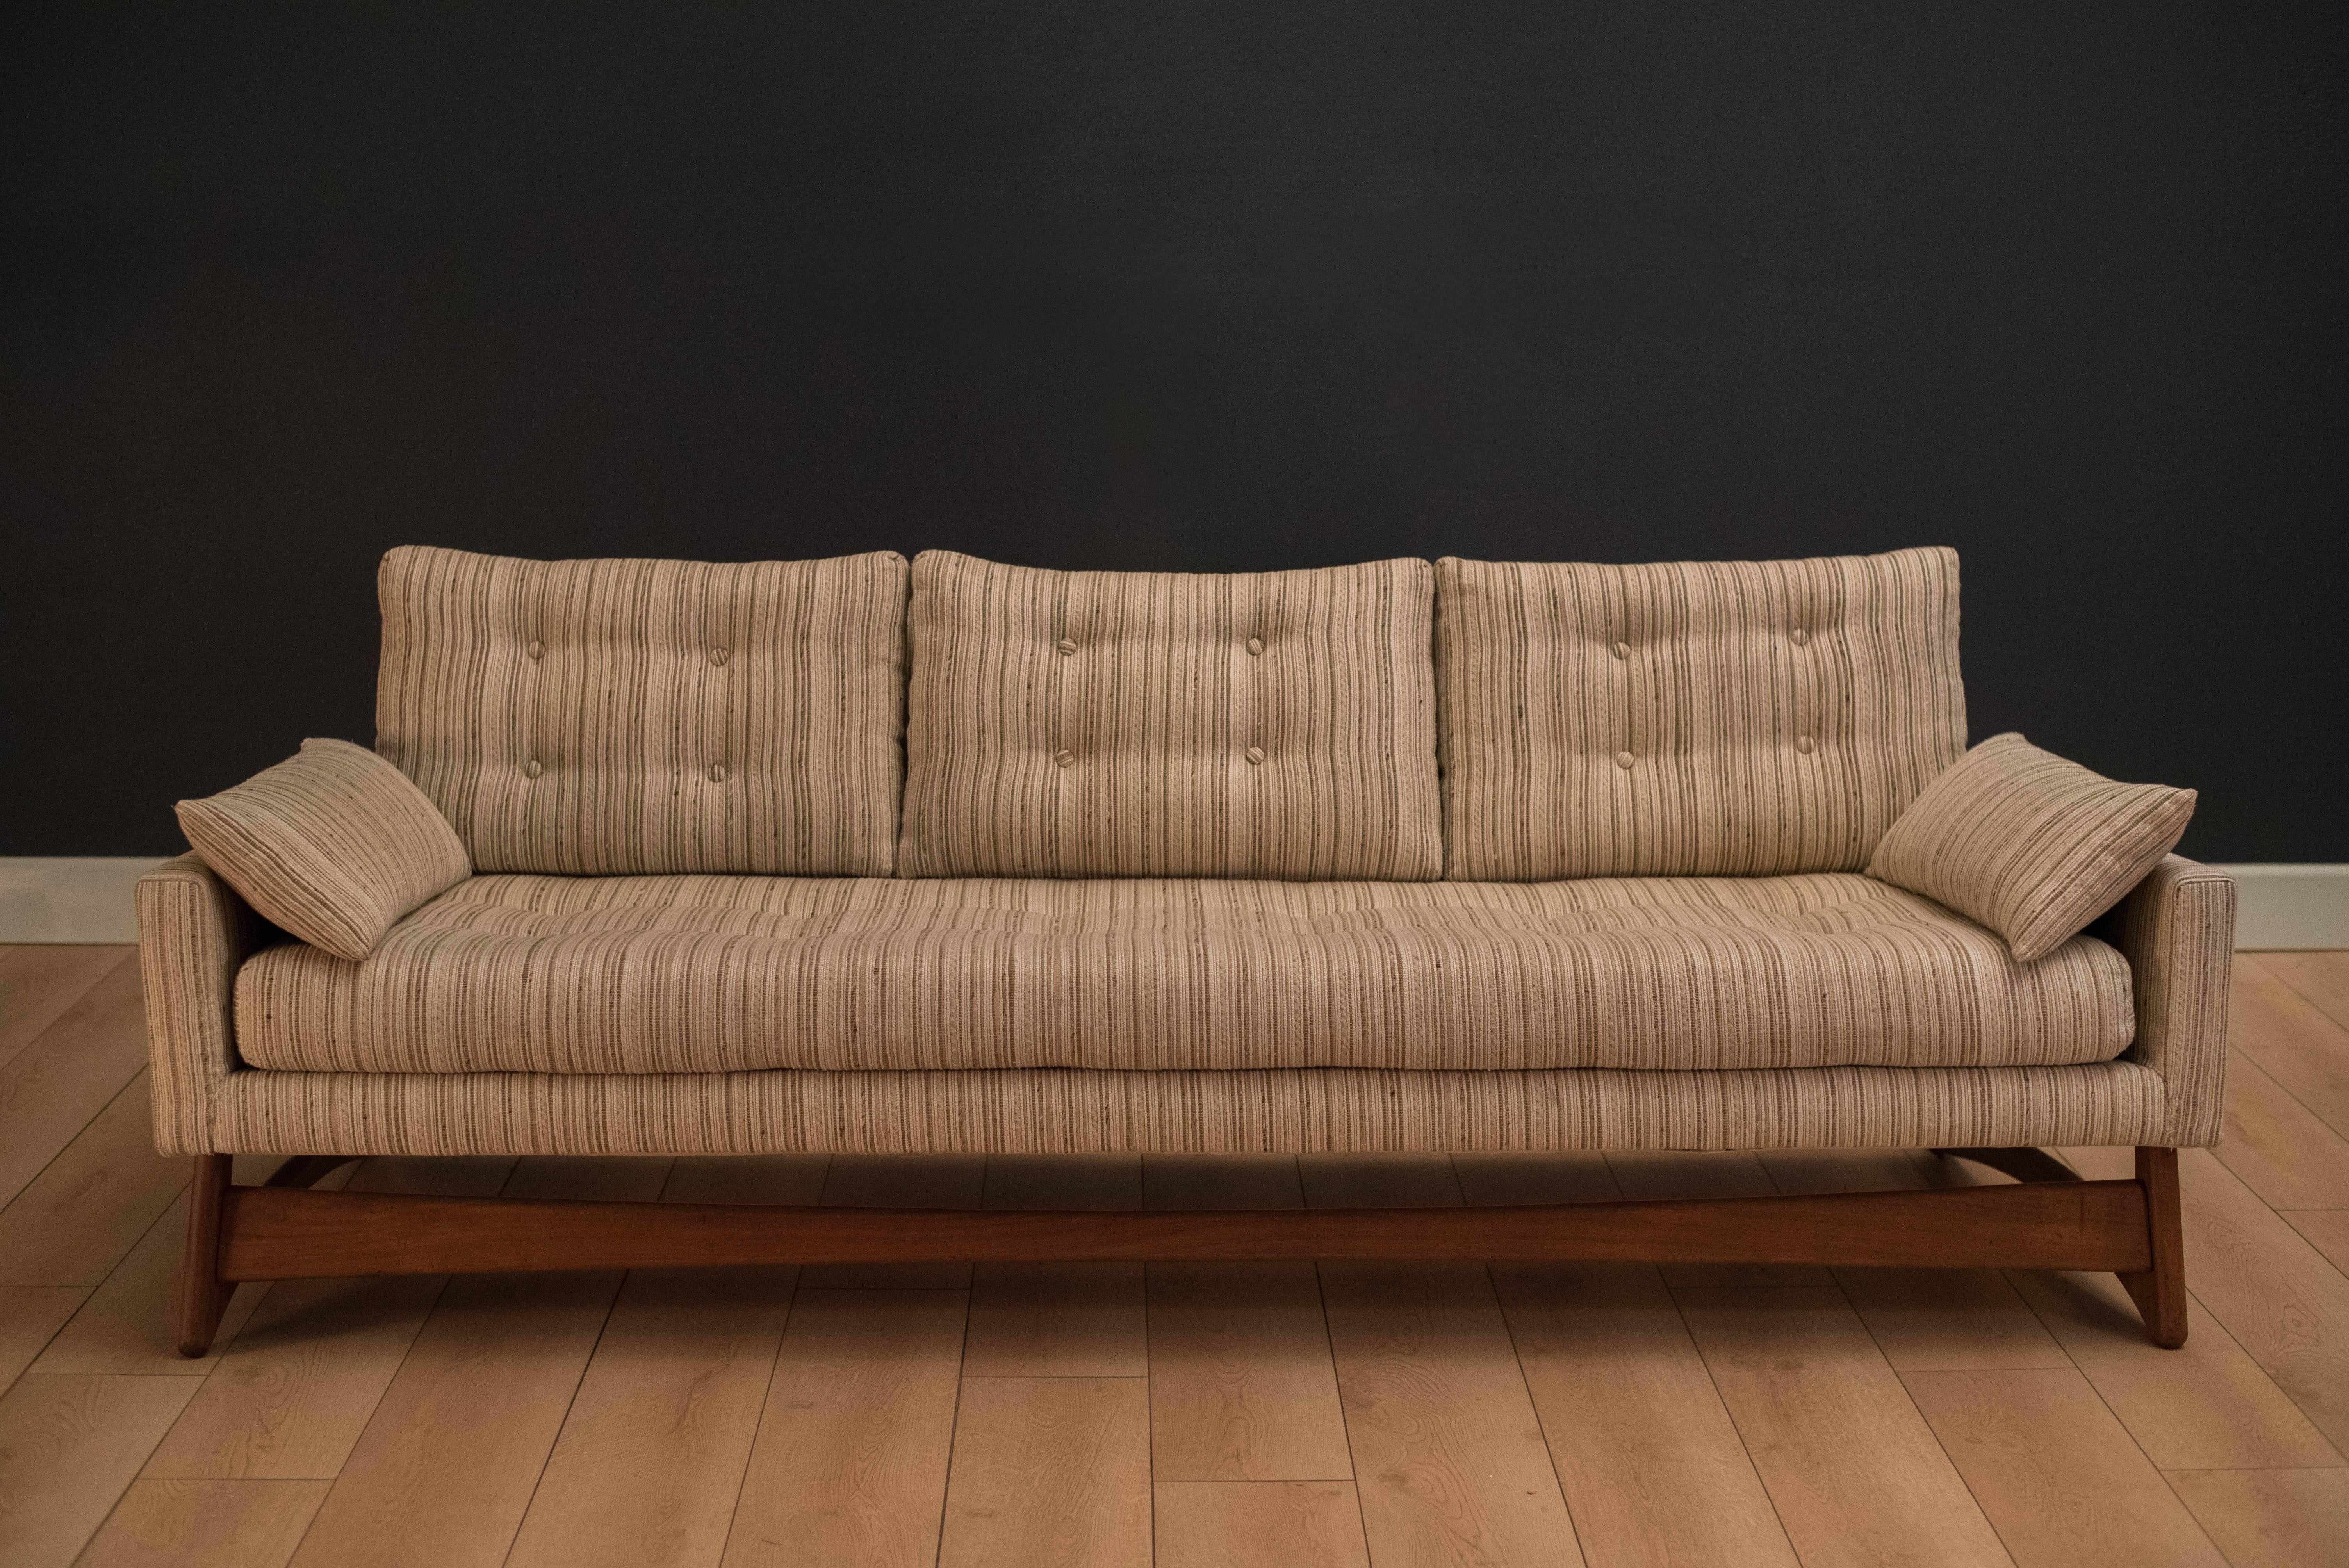 Mid-Century Modern sofa designed by Adrian Pearsall for Craft Associates Inc. This piece features the iconic sculptural walnut base and interwoven blends of ivory and neutral upholstery.